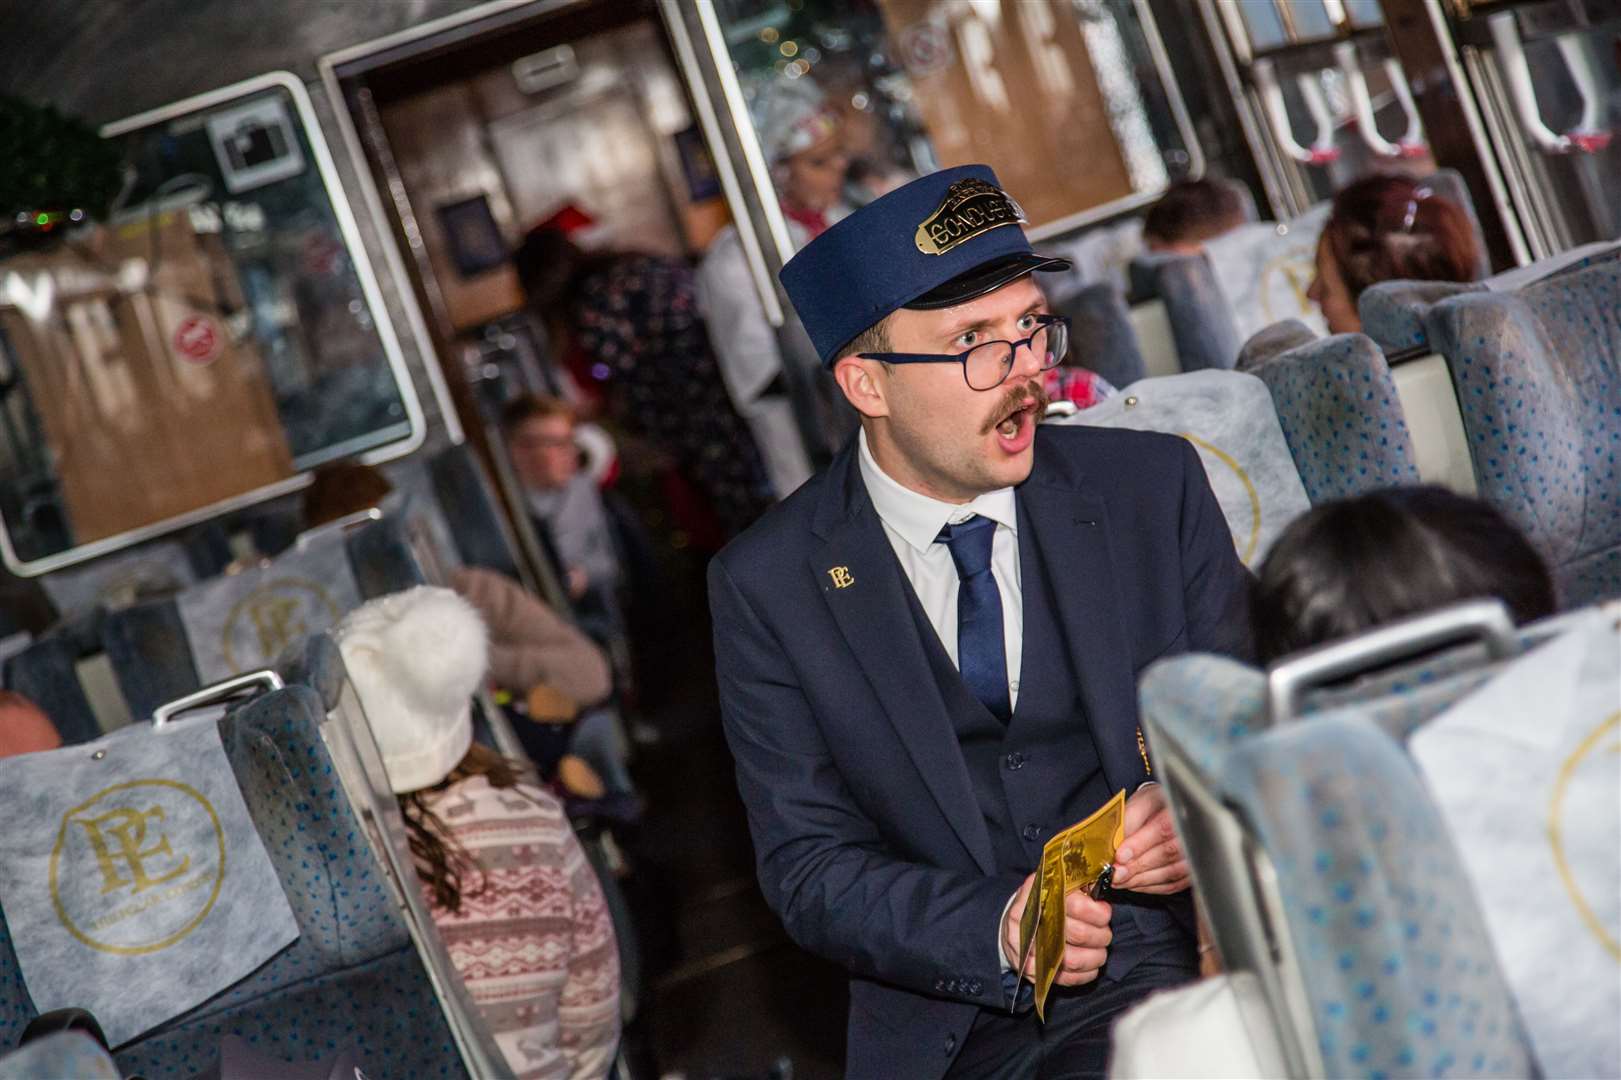 The Polar Express will be pulling in to the Spa Valley Railway this Christmas